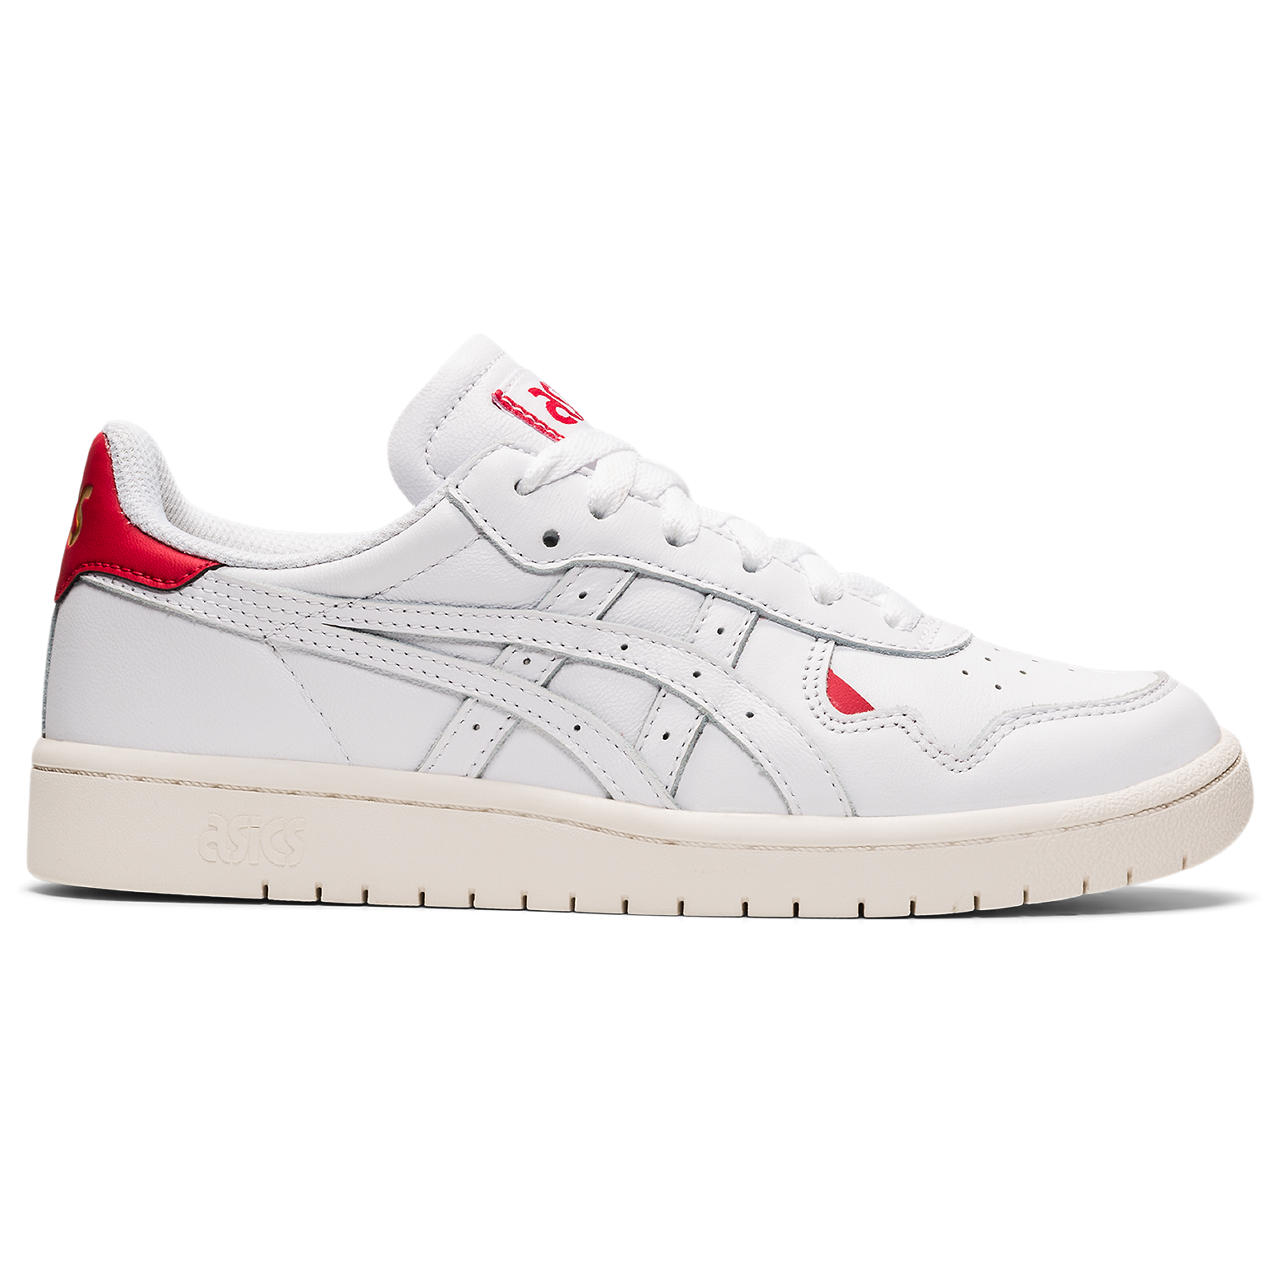 ASICS JAPAN S, WHITE/CLASSIC RED, swatch